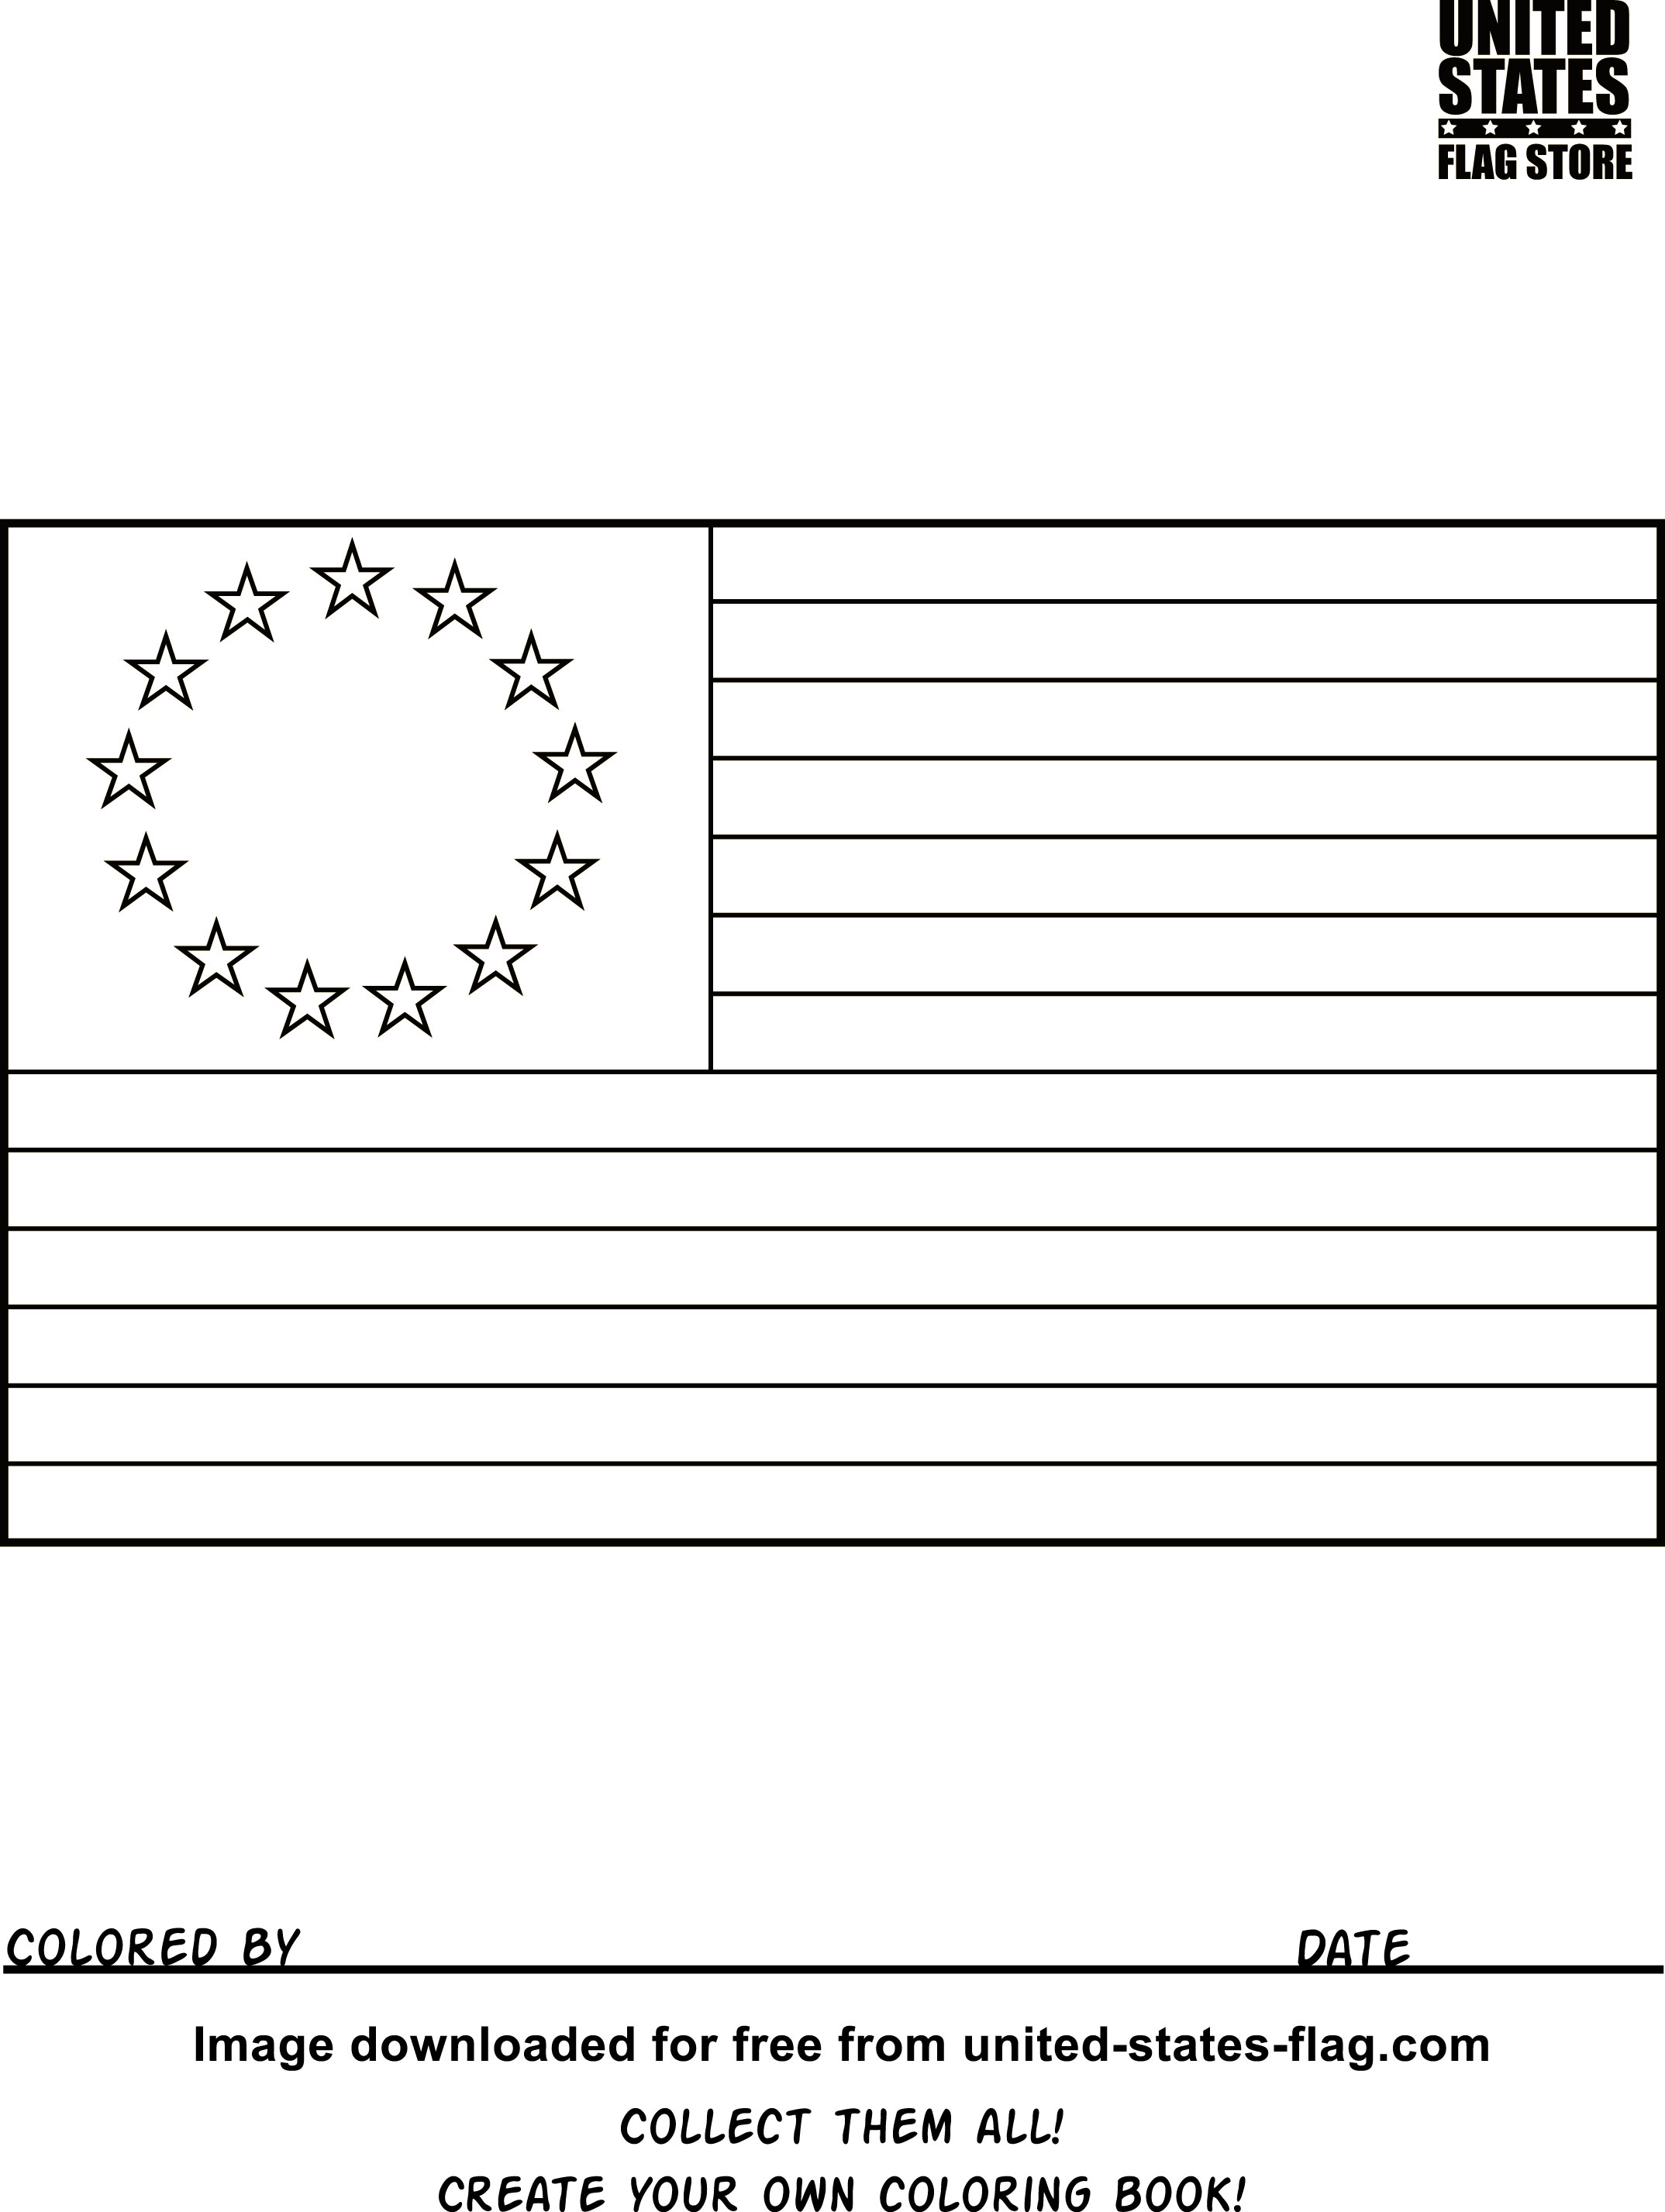 Israel Flag Coloring Page Free American Flag Coloring Pages